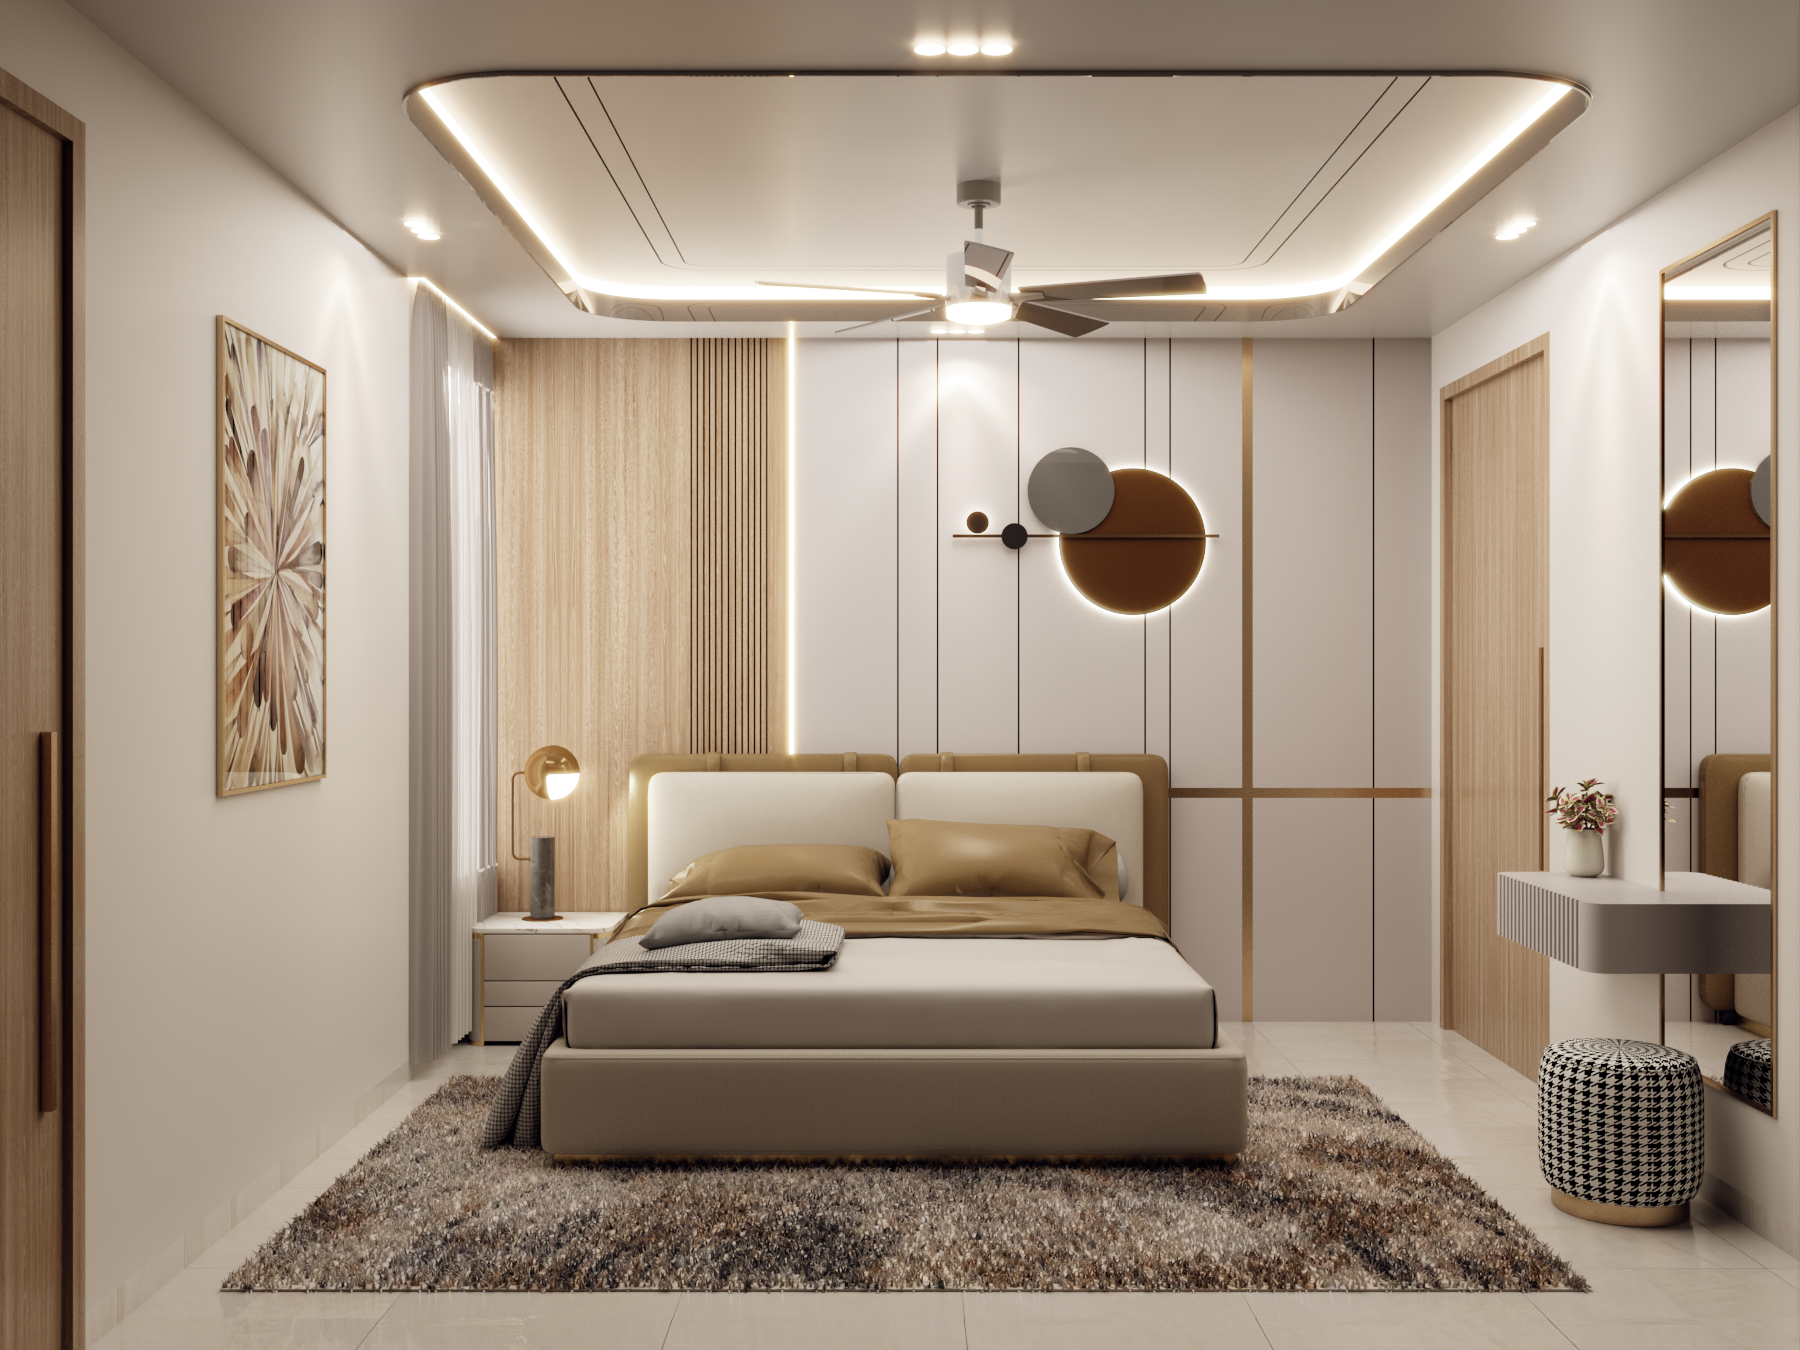 Able interiors: Best Residential Interior Designer Service Provider Company in Lucknow